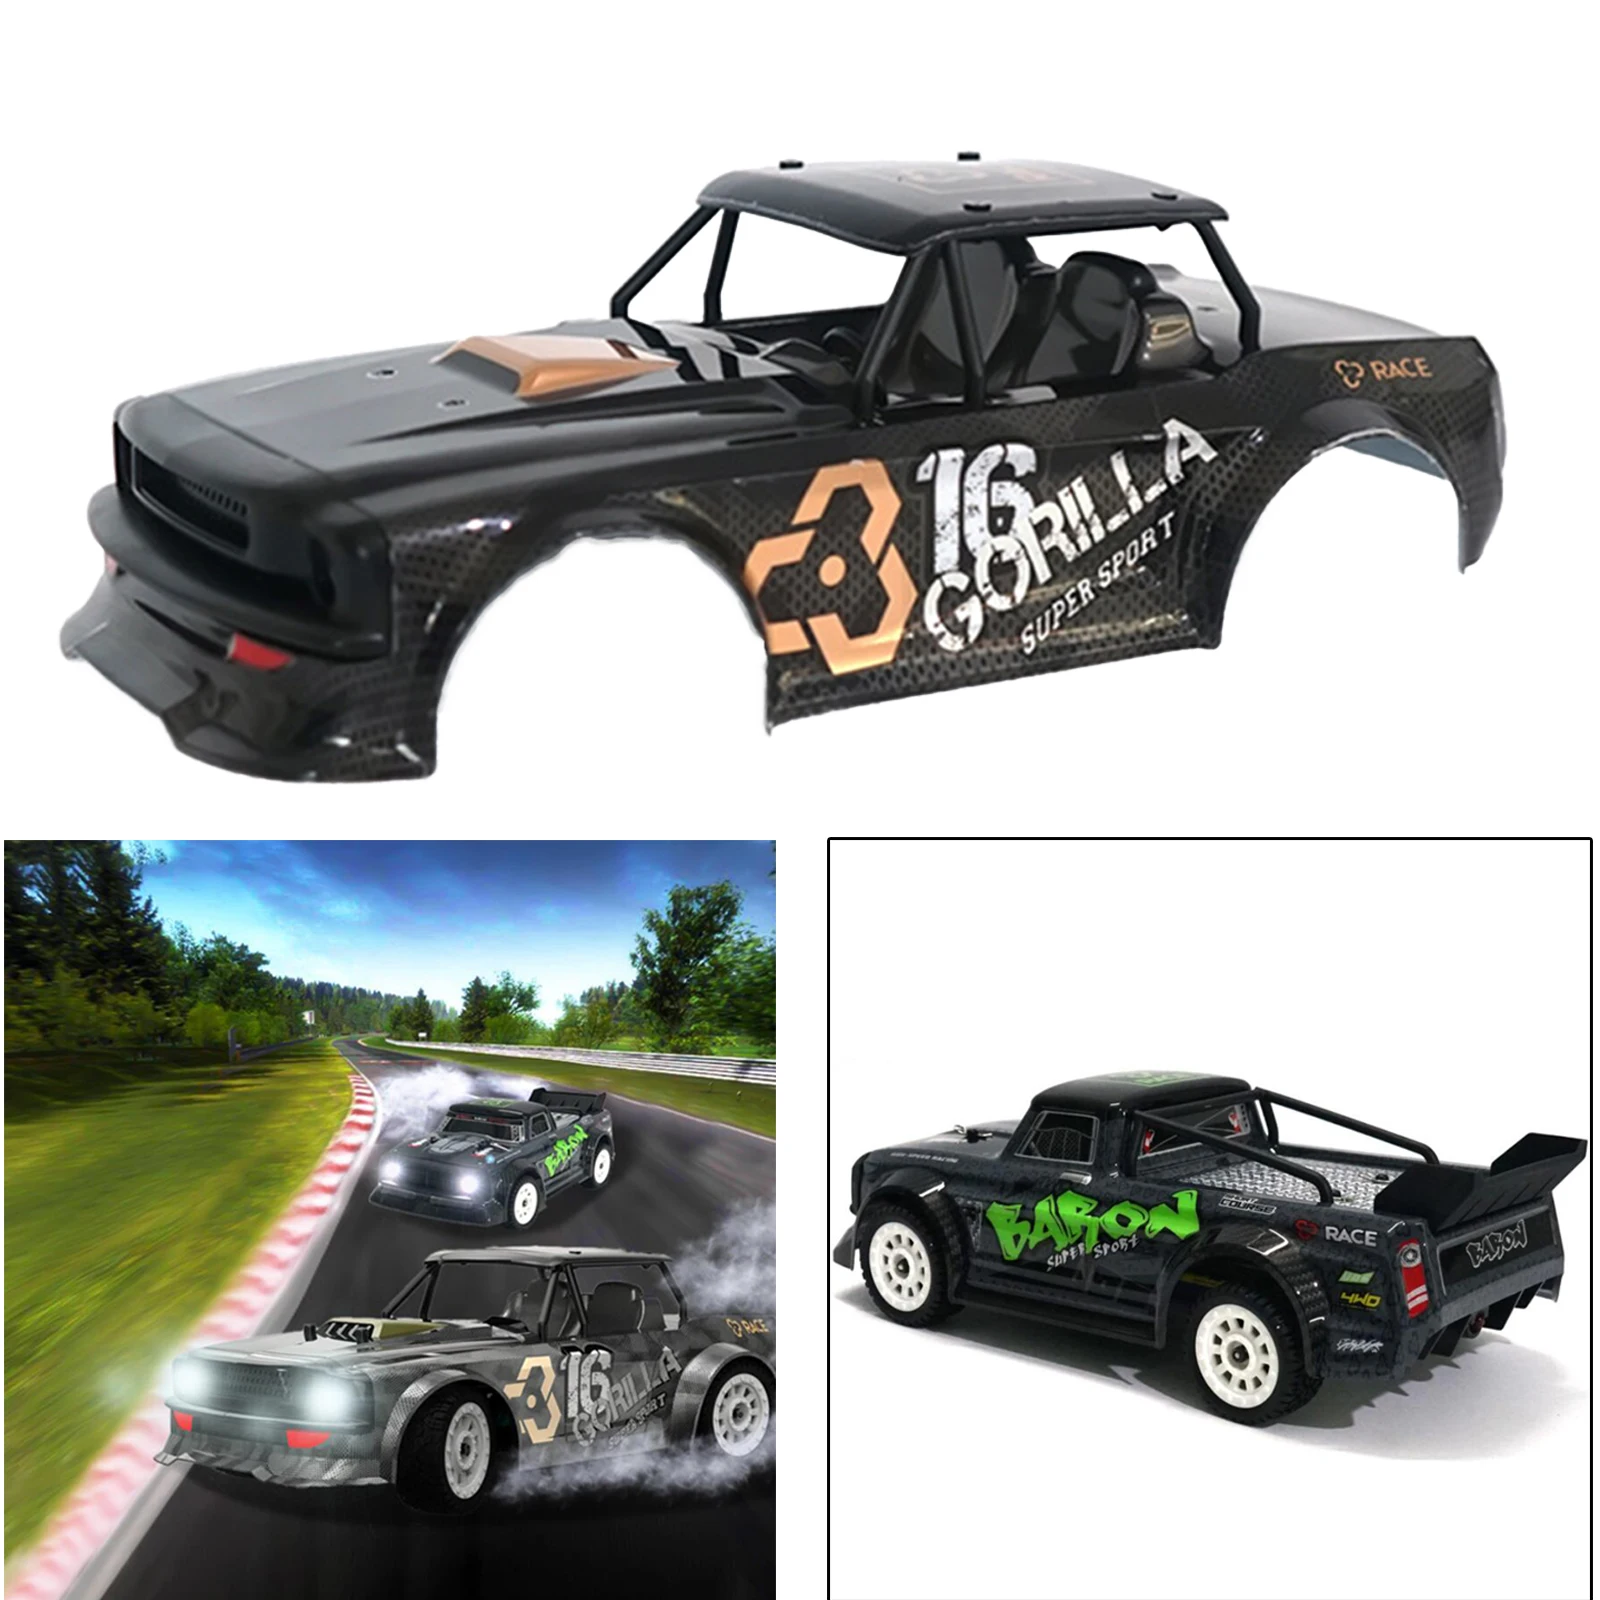 Replacement Body Shell for SG-1604 1:16 Scale RC Rally Truck Upgrade Parts